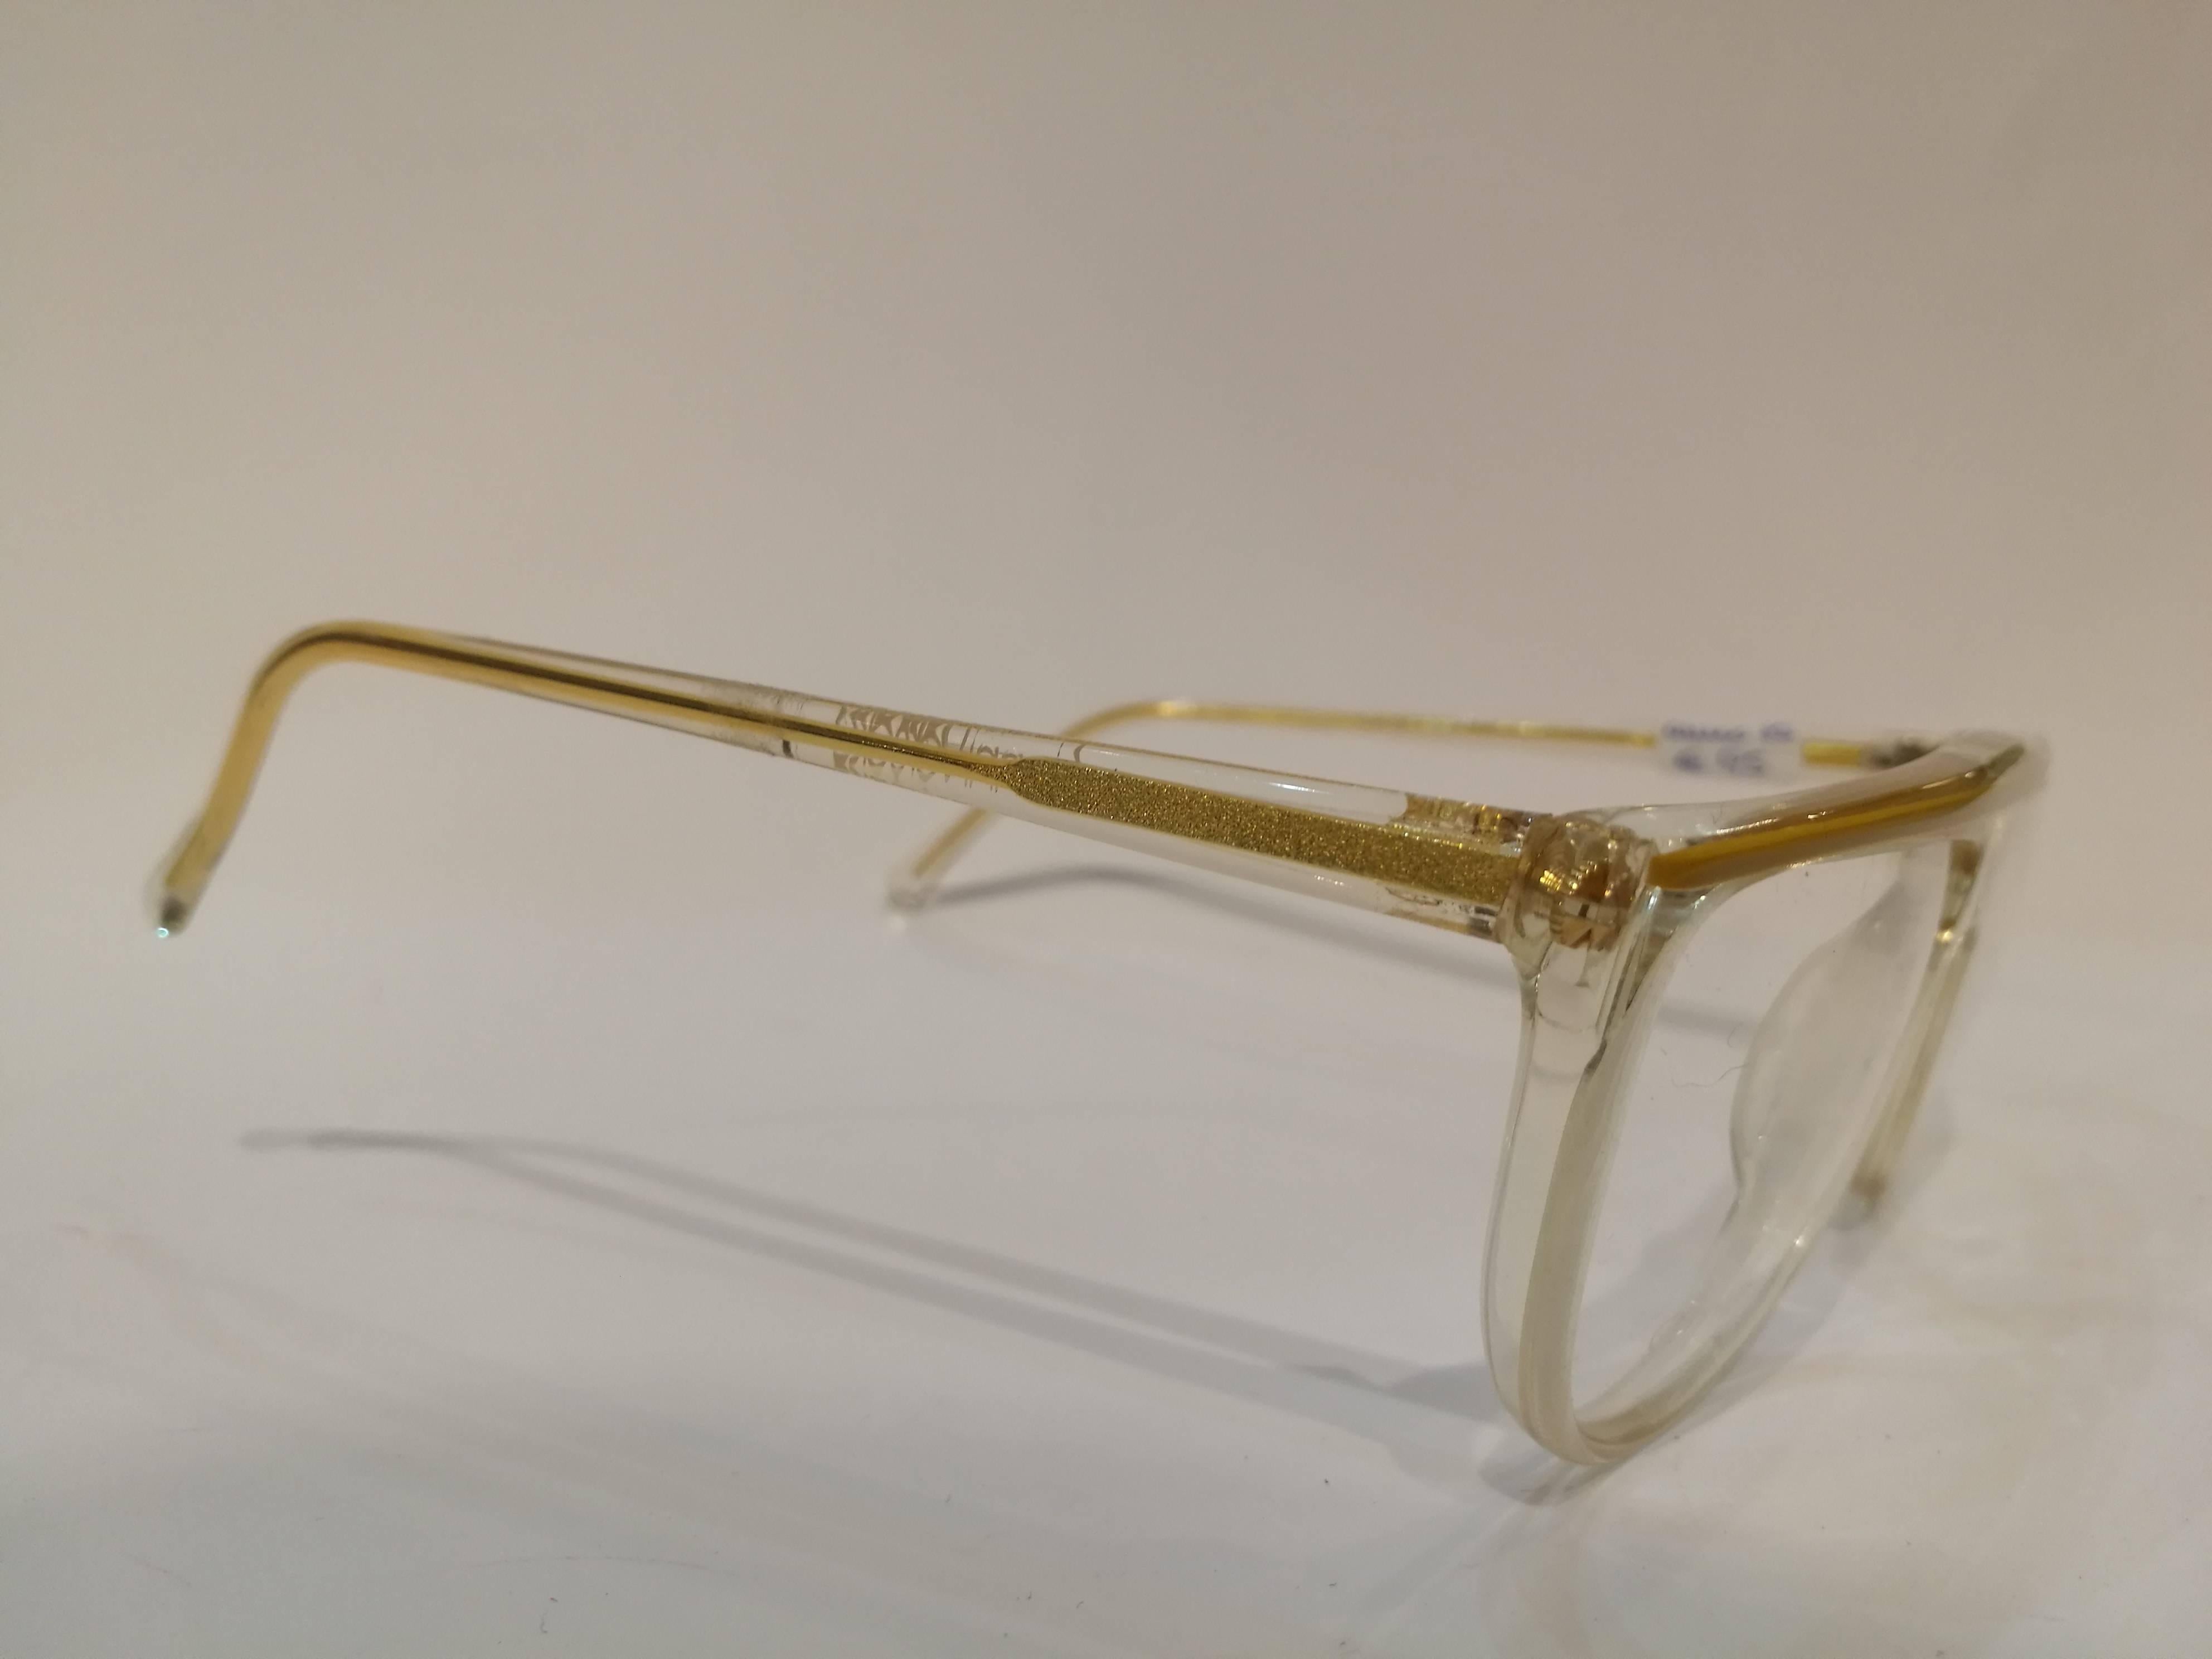 Gianni Versace vintage frame glasses still with tags